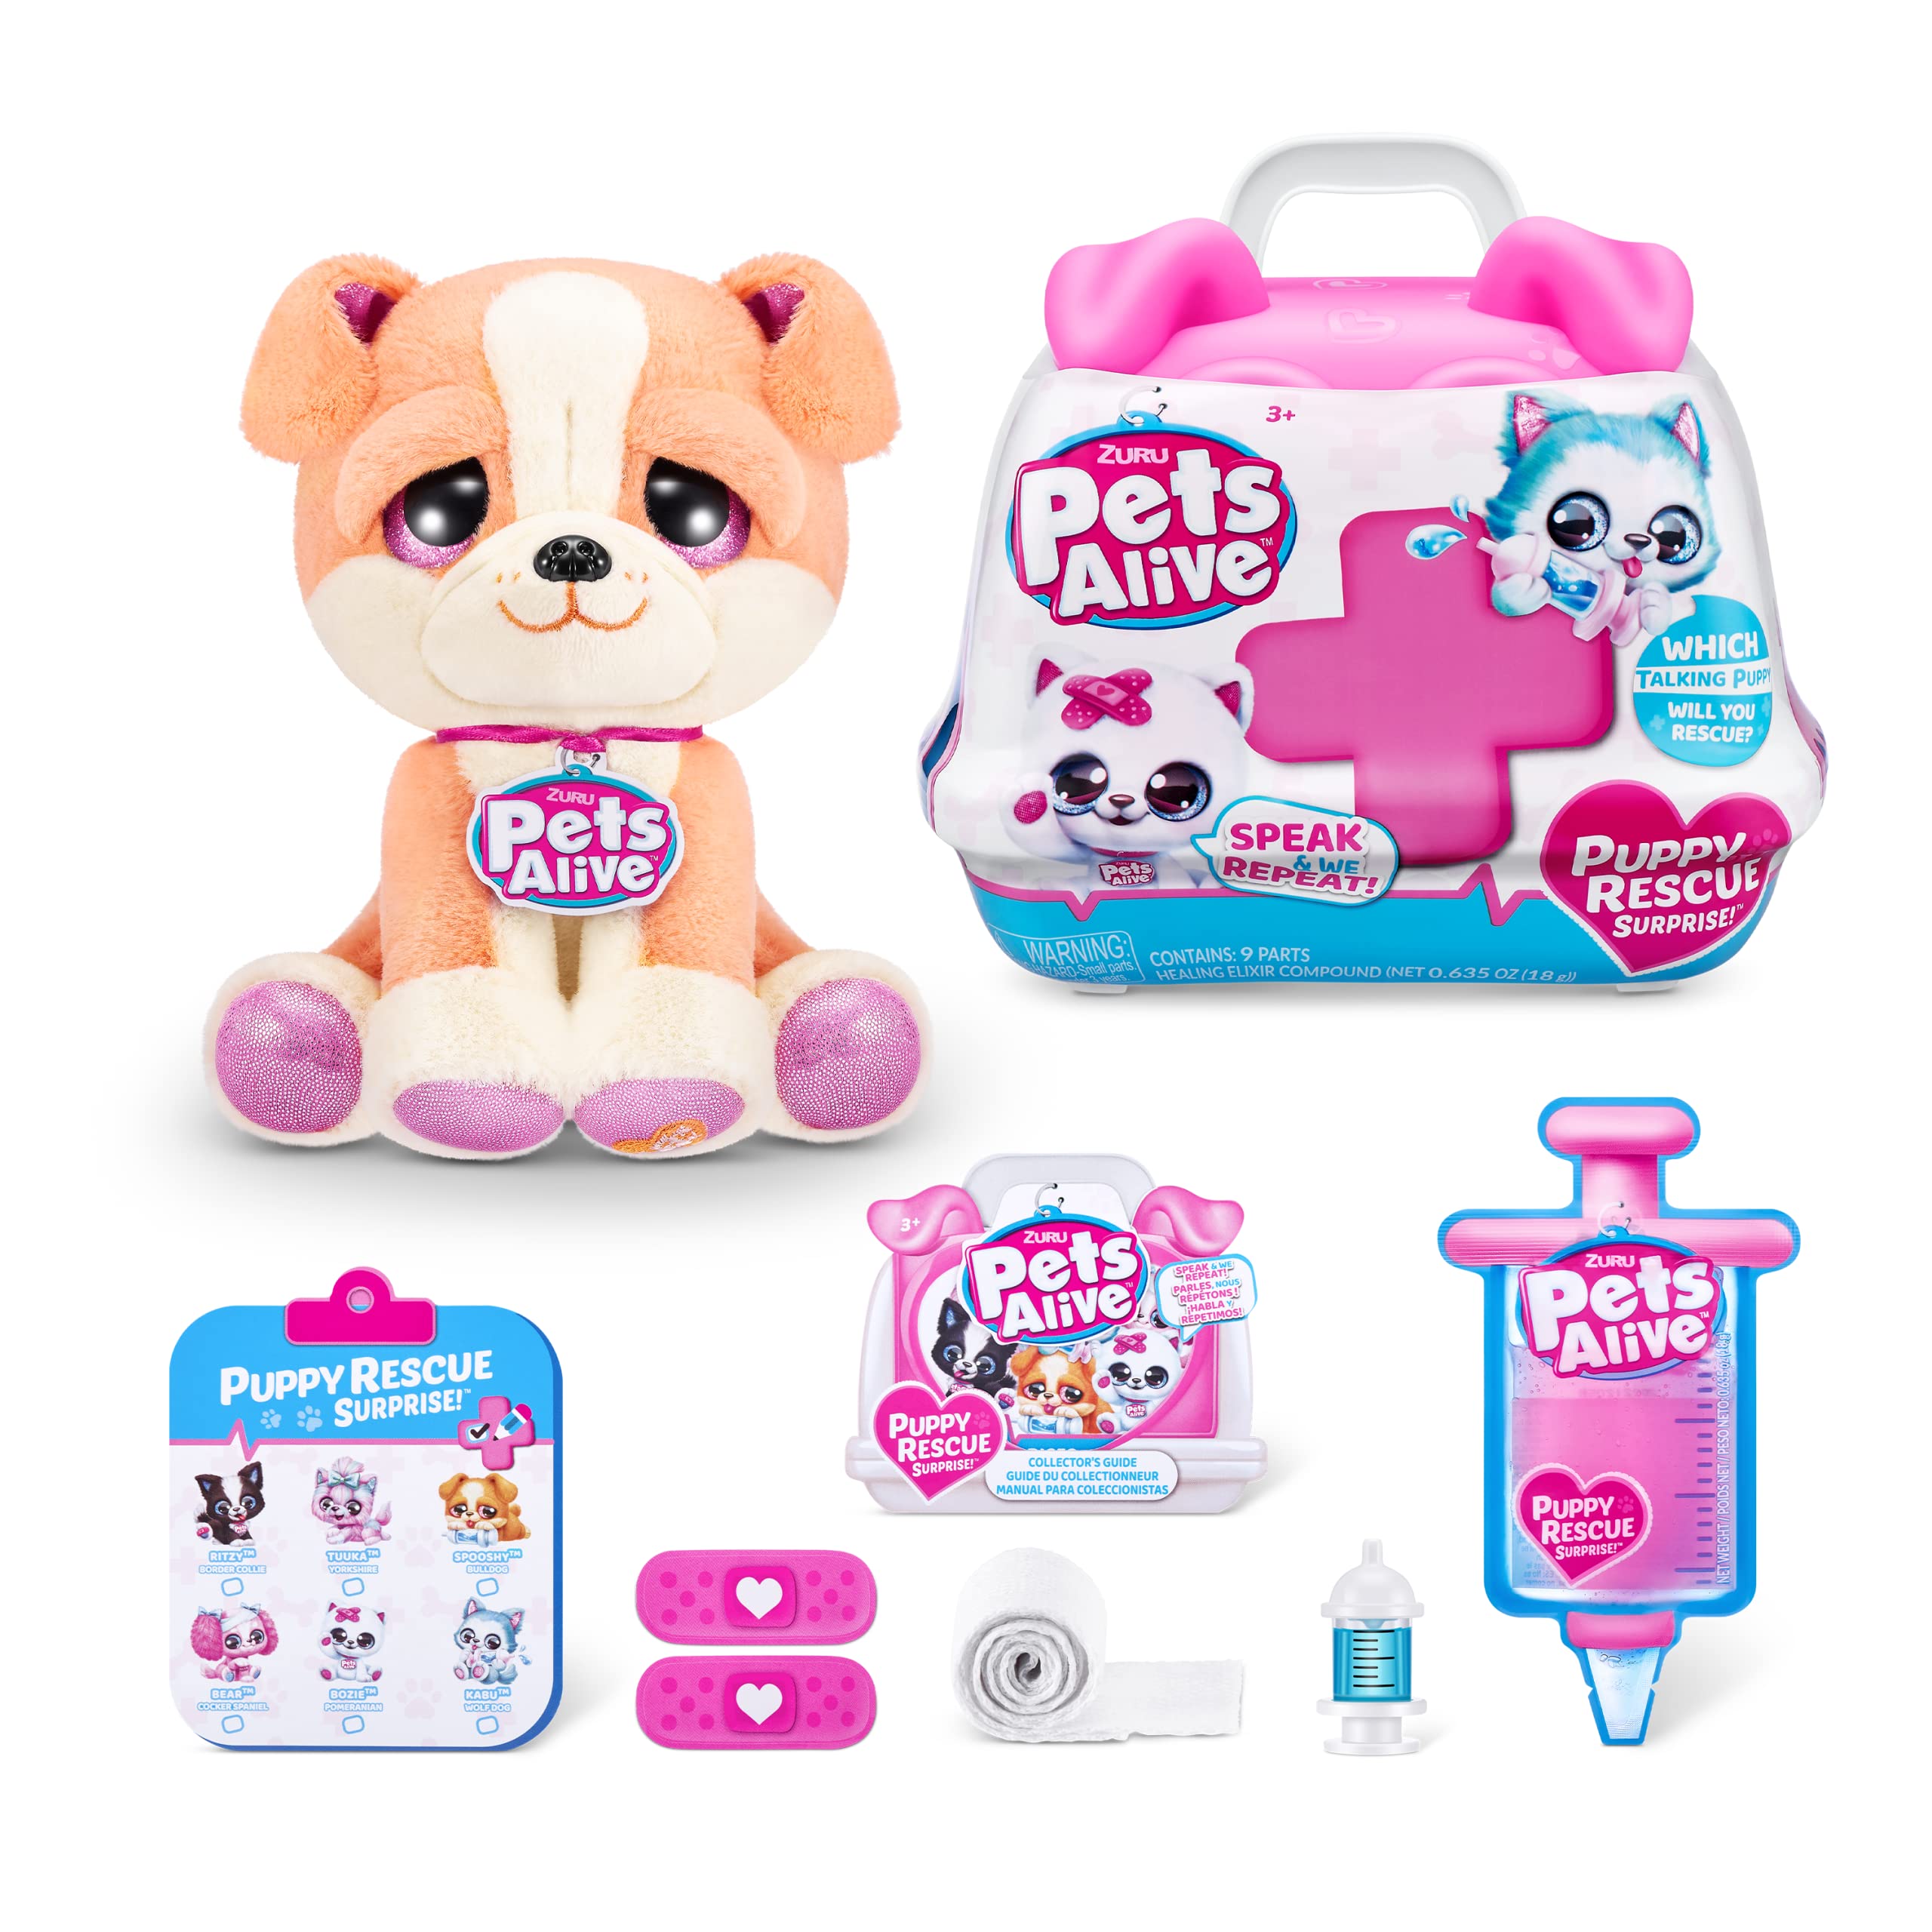 Pets Alive Pet Shop Surprise Puppy Rescue (Bull Dog) by ZURU Surprise Puppy Plush, Ultra Soft Plushies, Surprises Inside, Interactive Toy Pets, Electronic Speak and Repeat (Series 3)